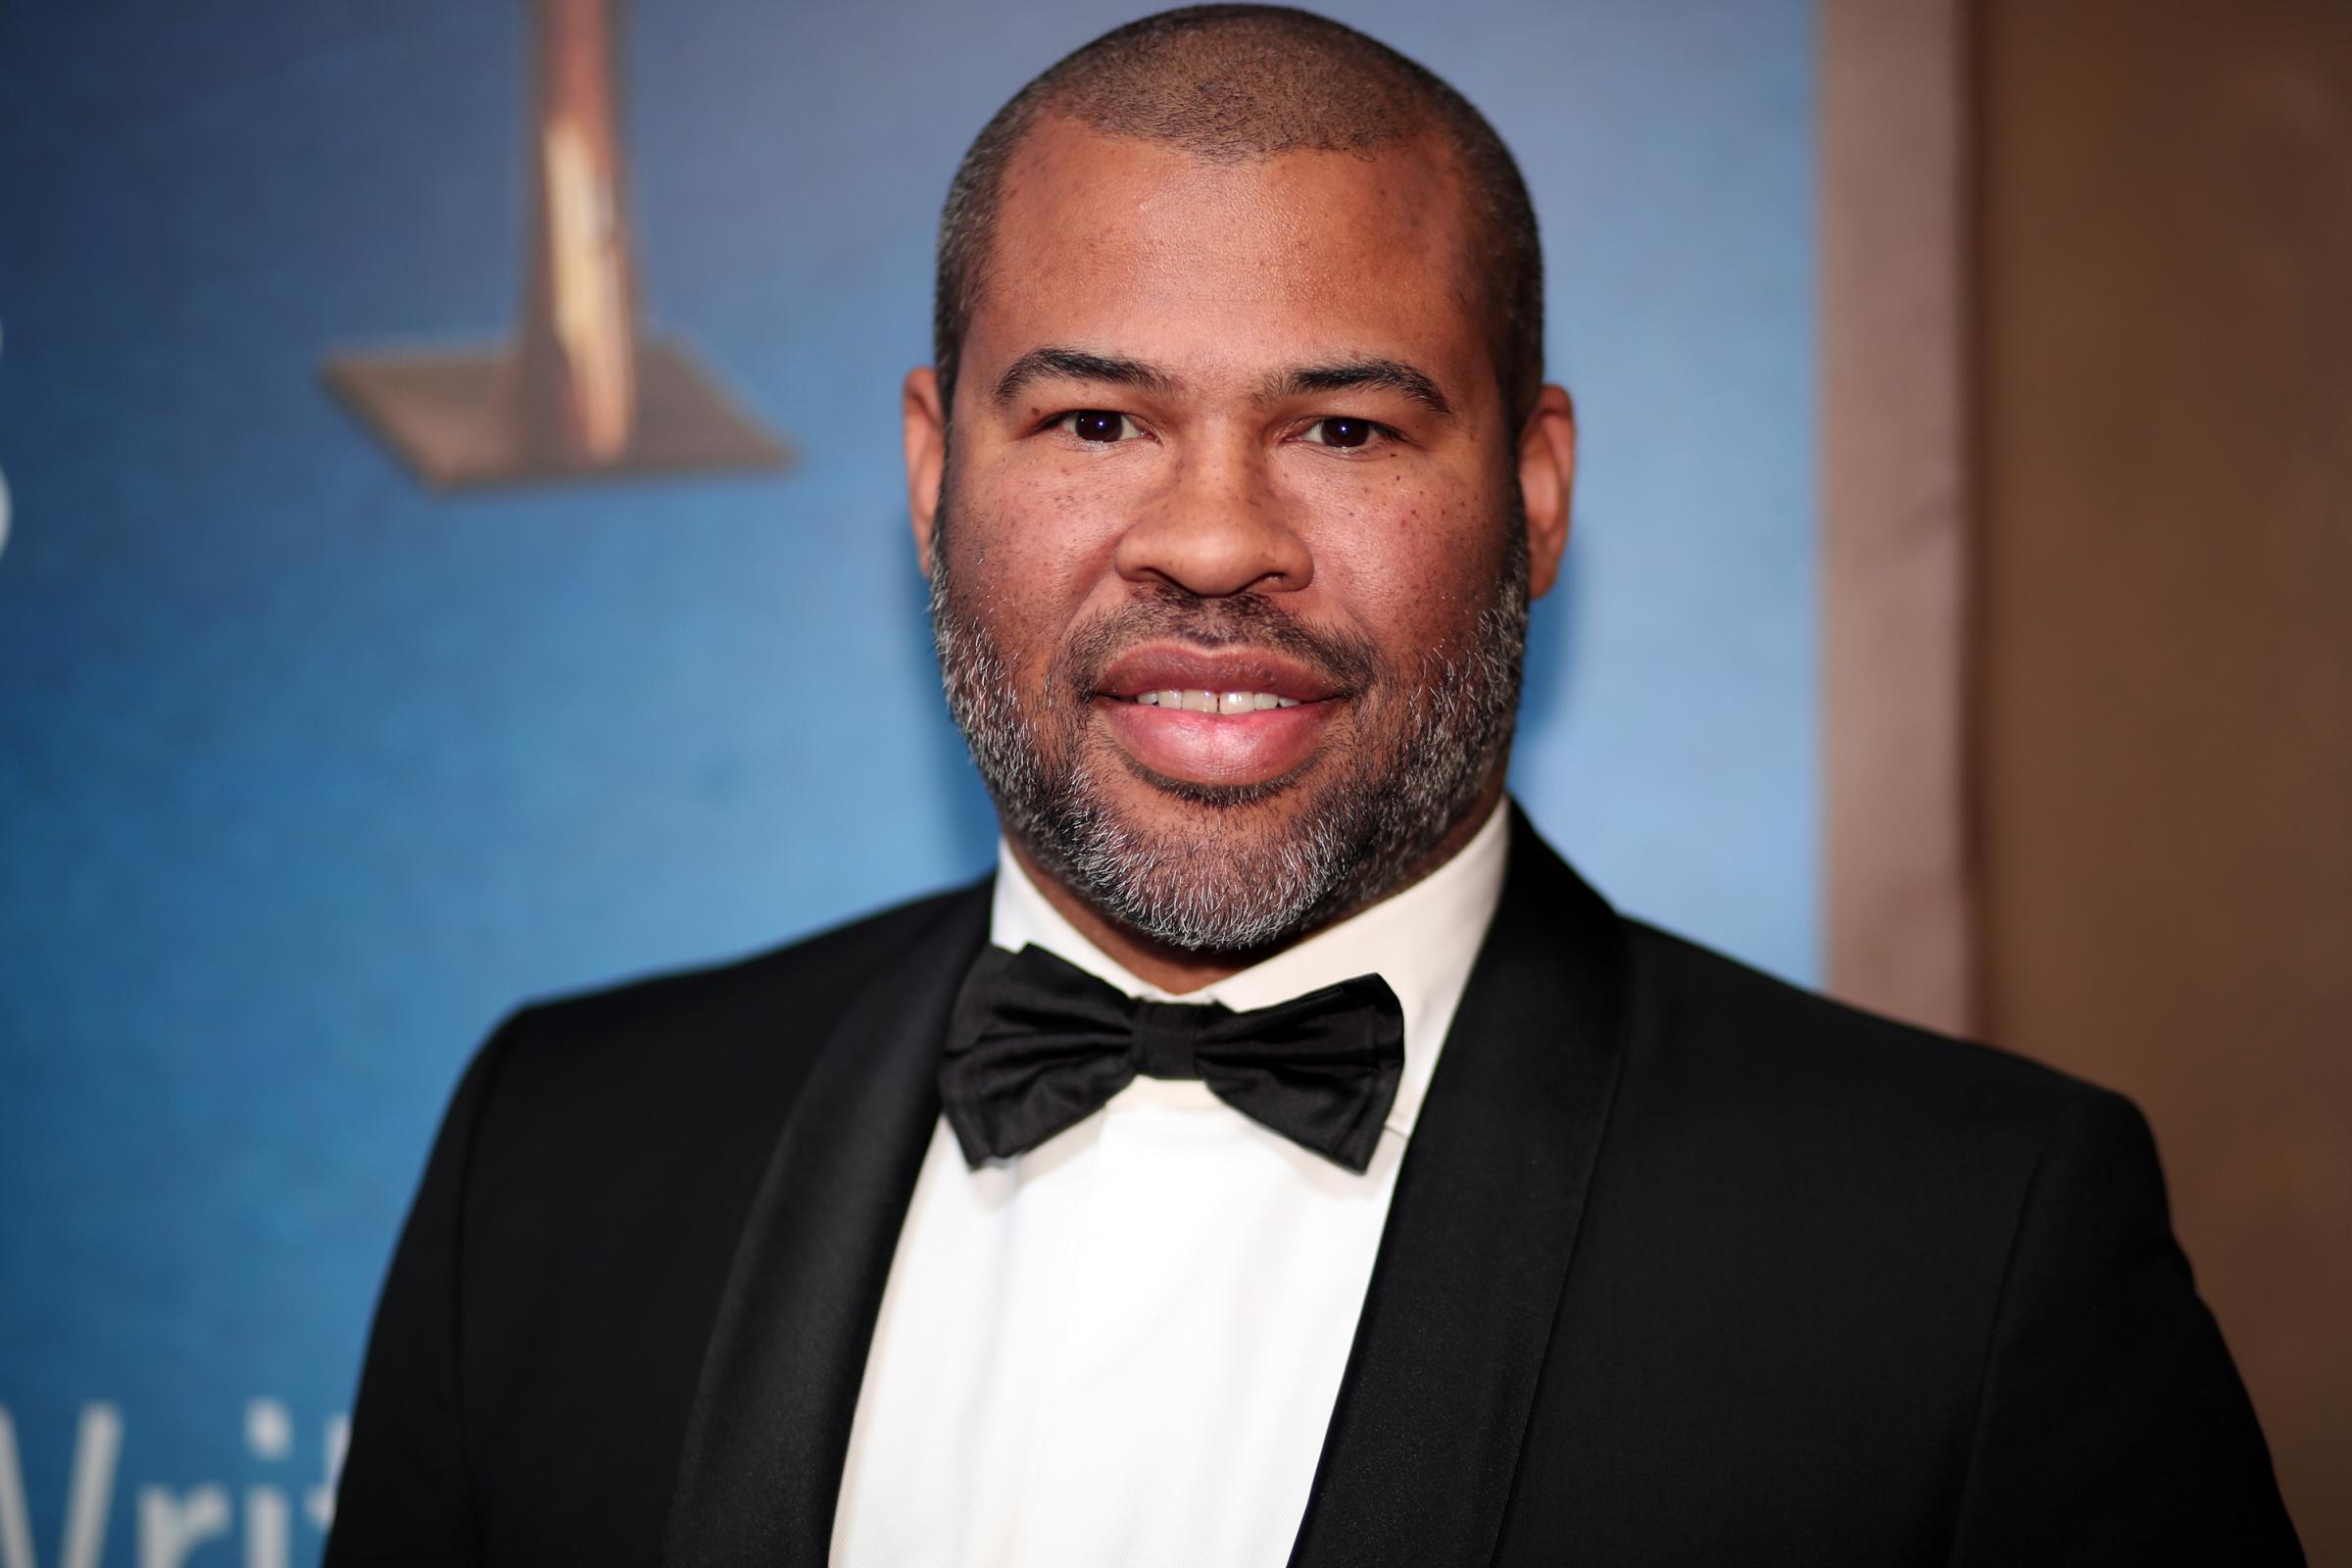 Jordan Peele attends the 2018 Writers Guild Awards L.A. Ceremony at The Beverly Hilton Hotel on February 11, 2018 in Beverly Hills, California.